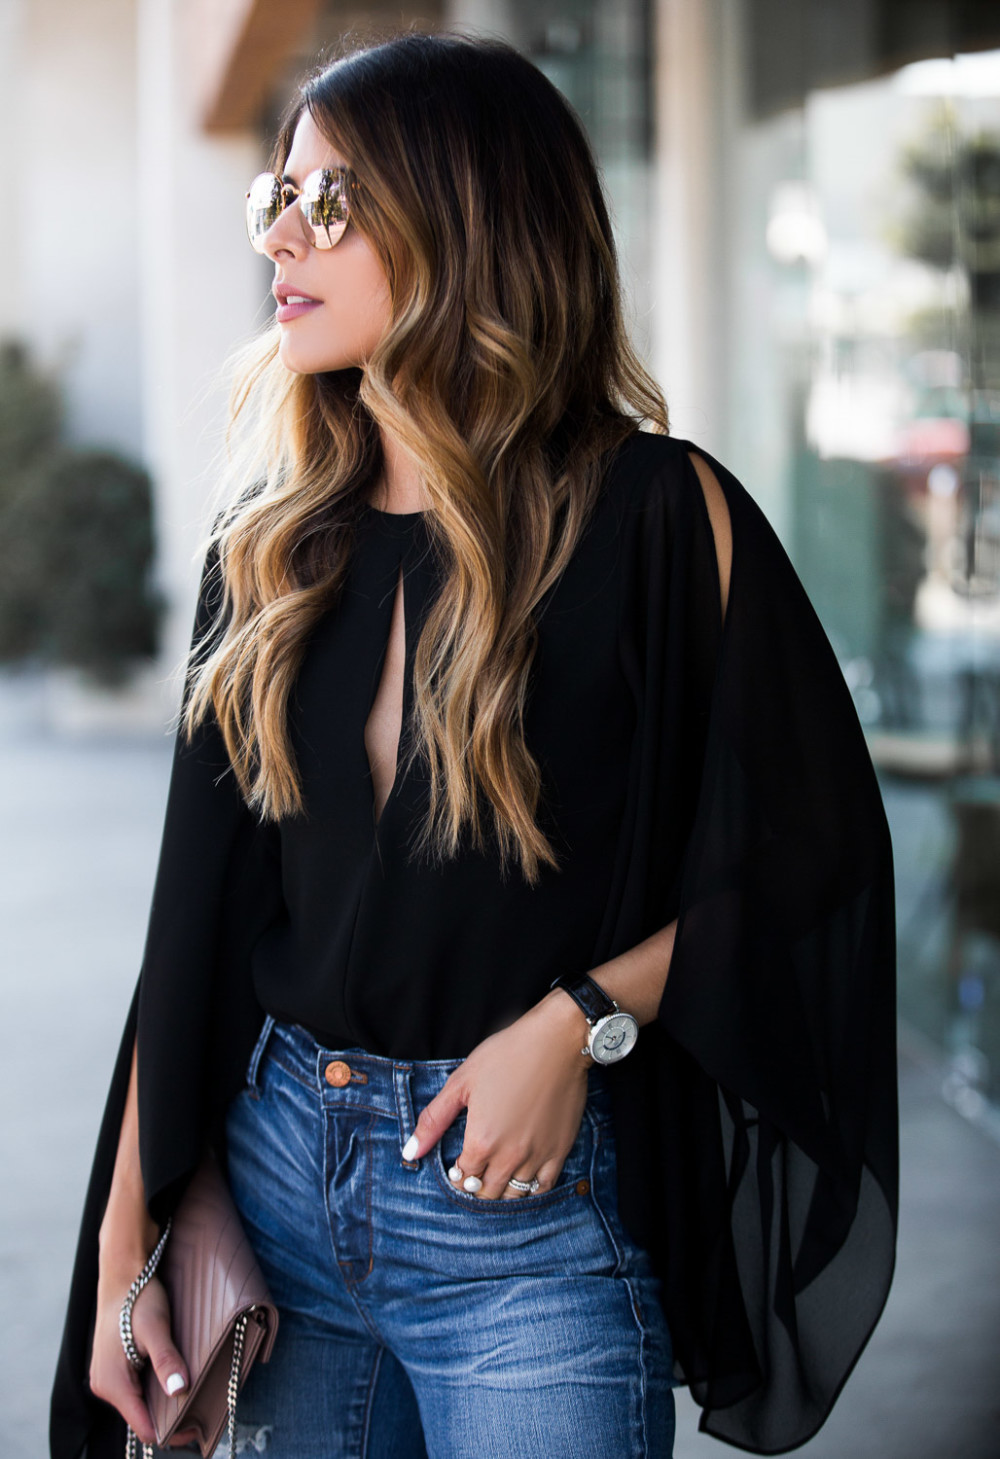 How to Style a Statement Top - The Girl from Panama